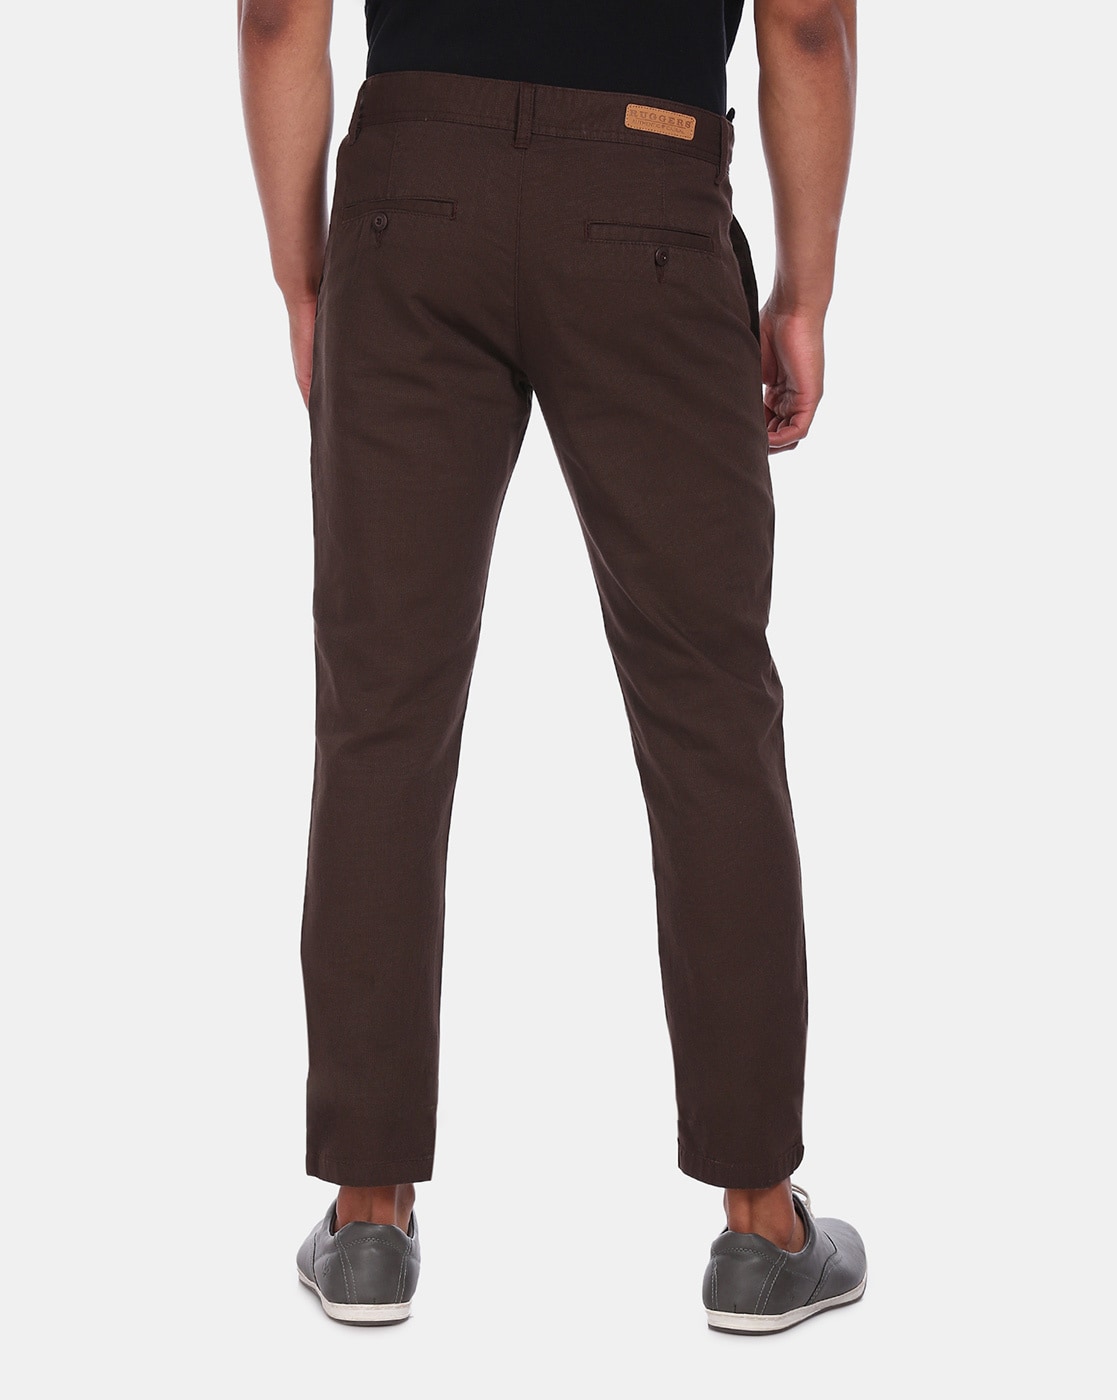 Buy Ruggers Tapered Fit Mid Waist Trousers - NNNOW.com